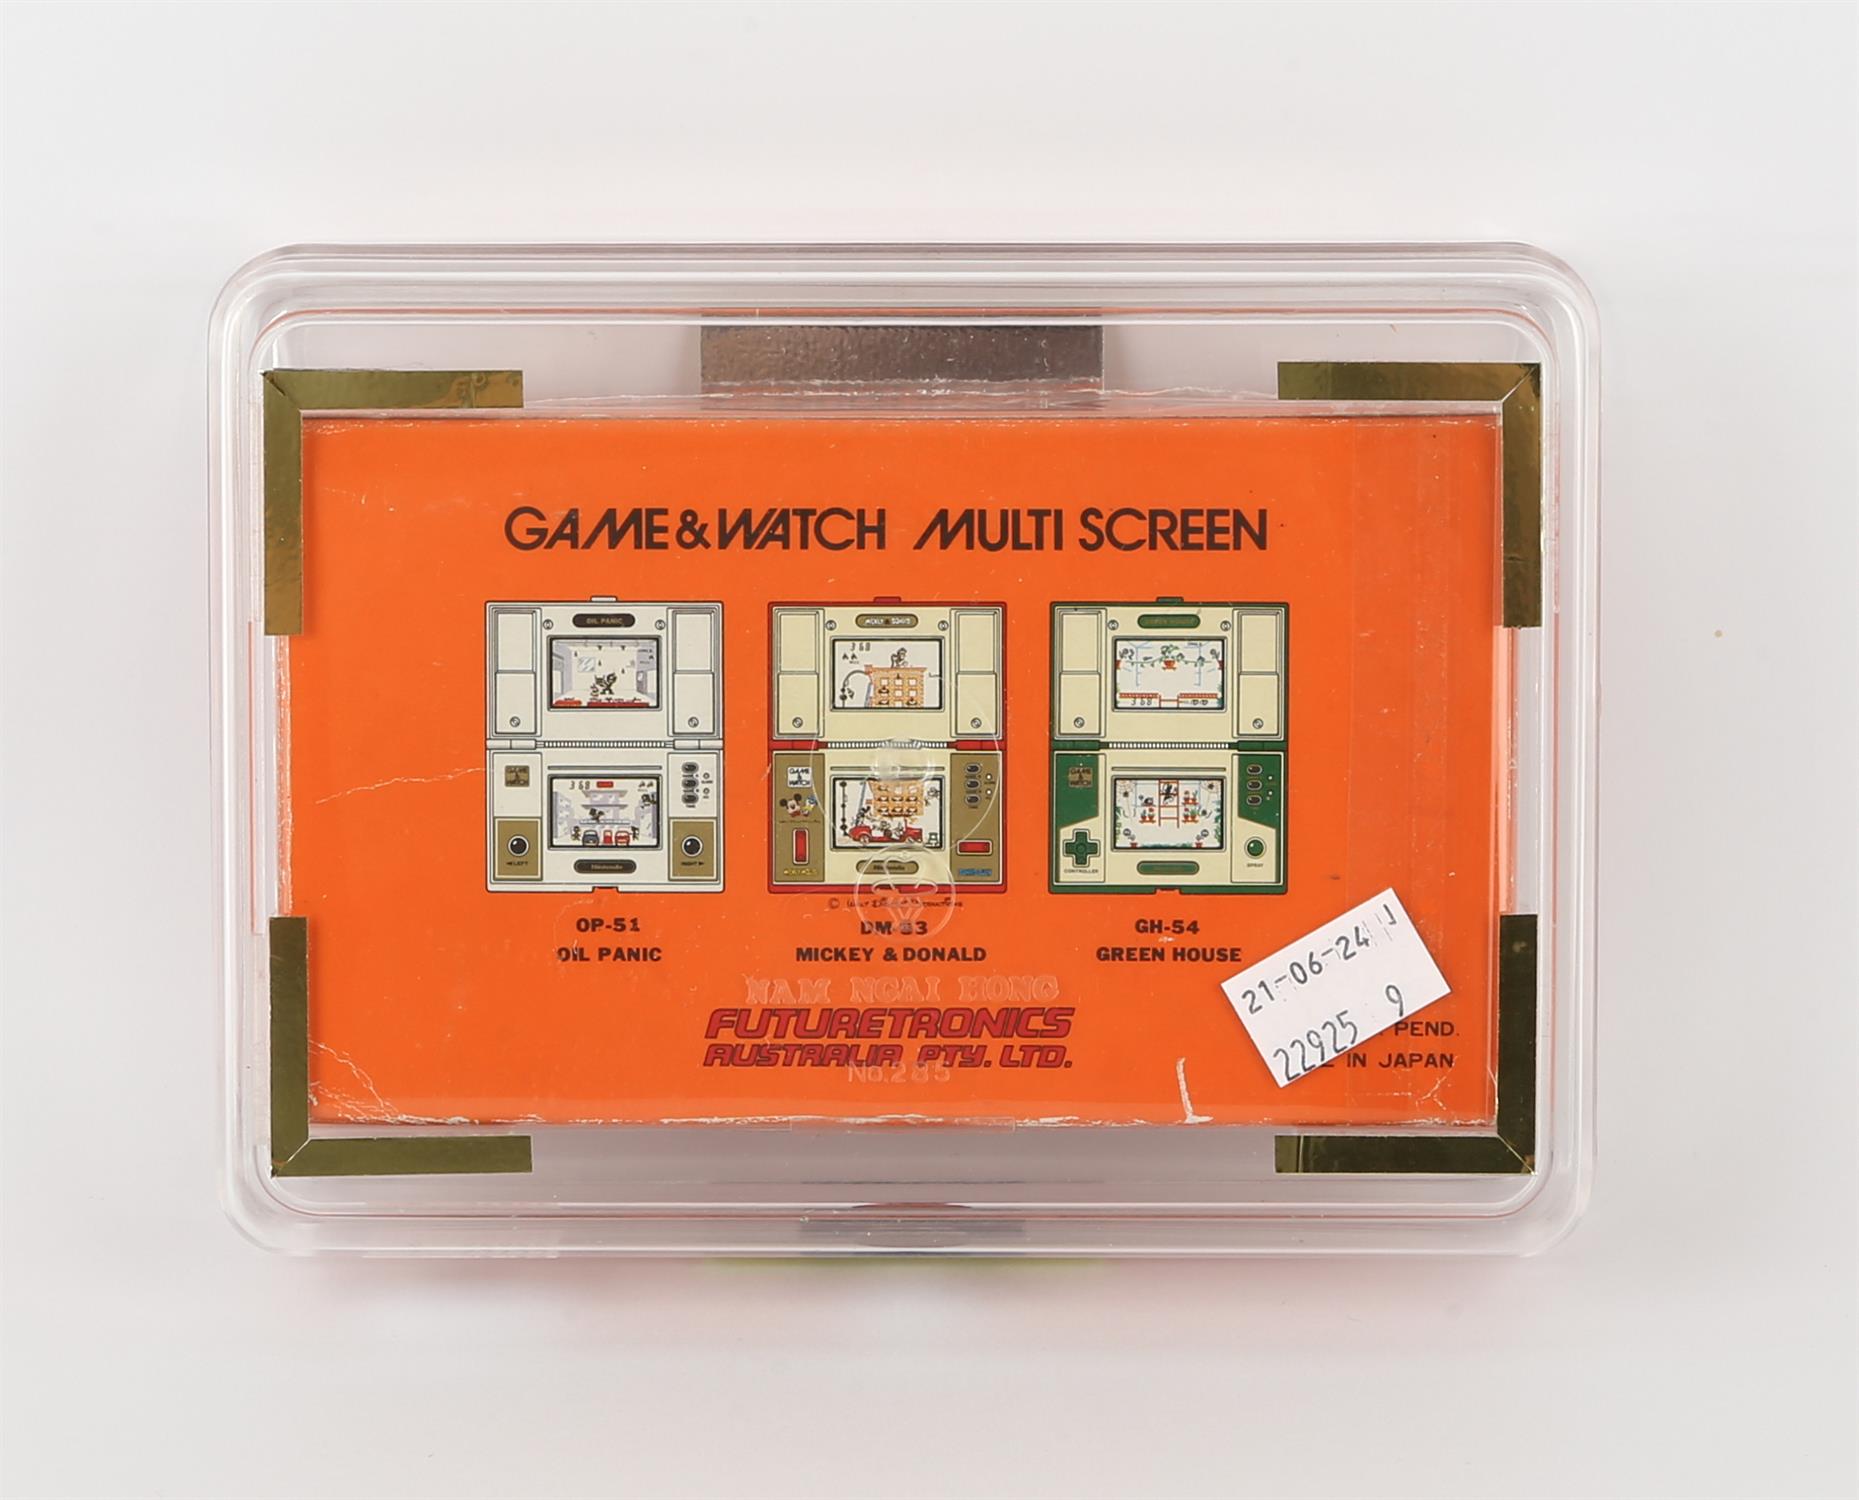 Nintendo Game & Watch Donkey Kong [DK-52] handheld console from 1982 (complete, boxed and in a - Image 2 of 13